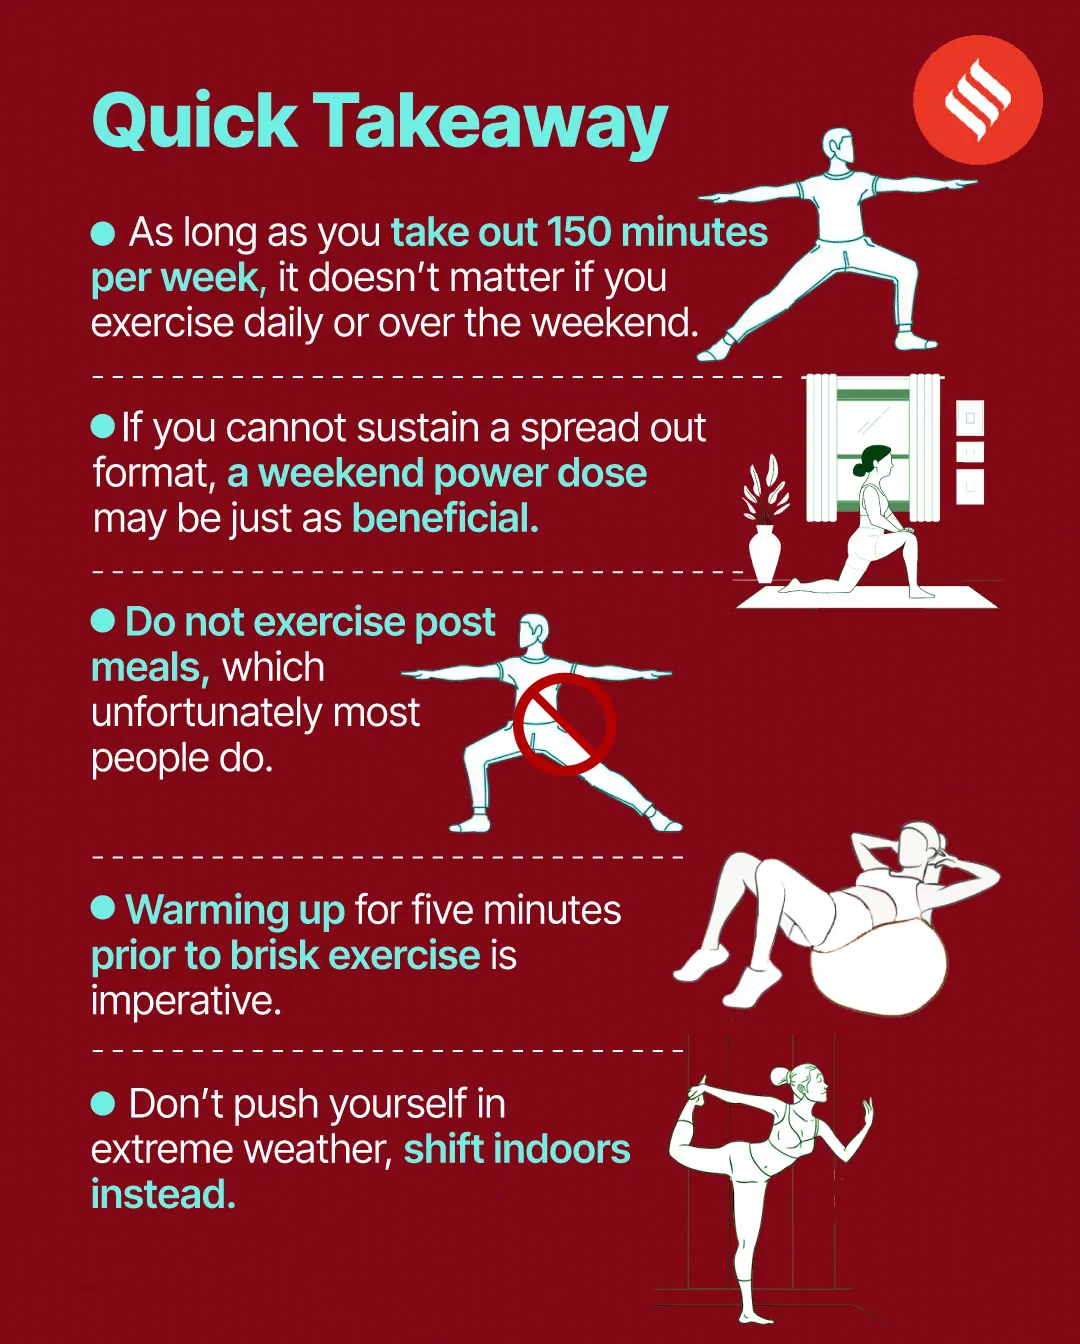 Are you a daily exerciser or weekend warrior? New study says both equally  good for heart health